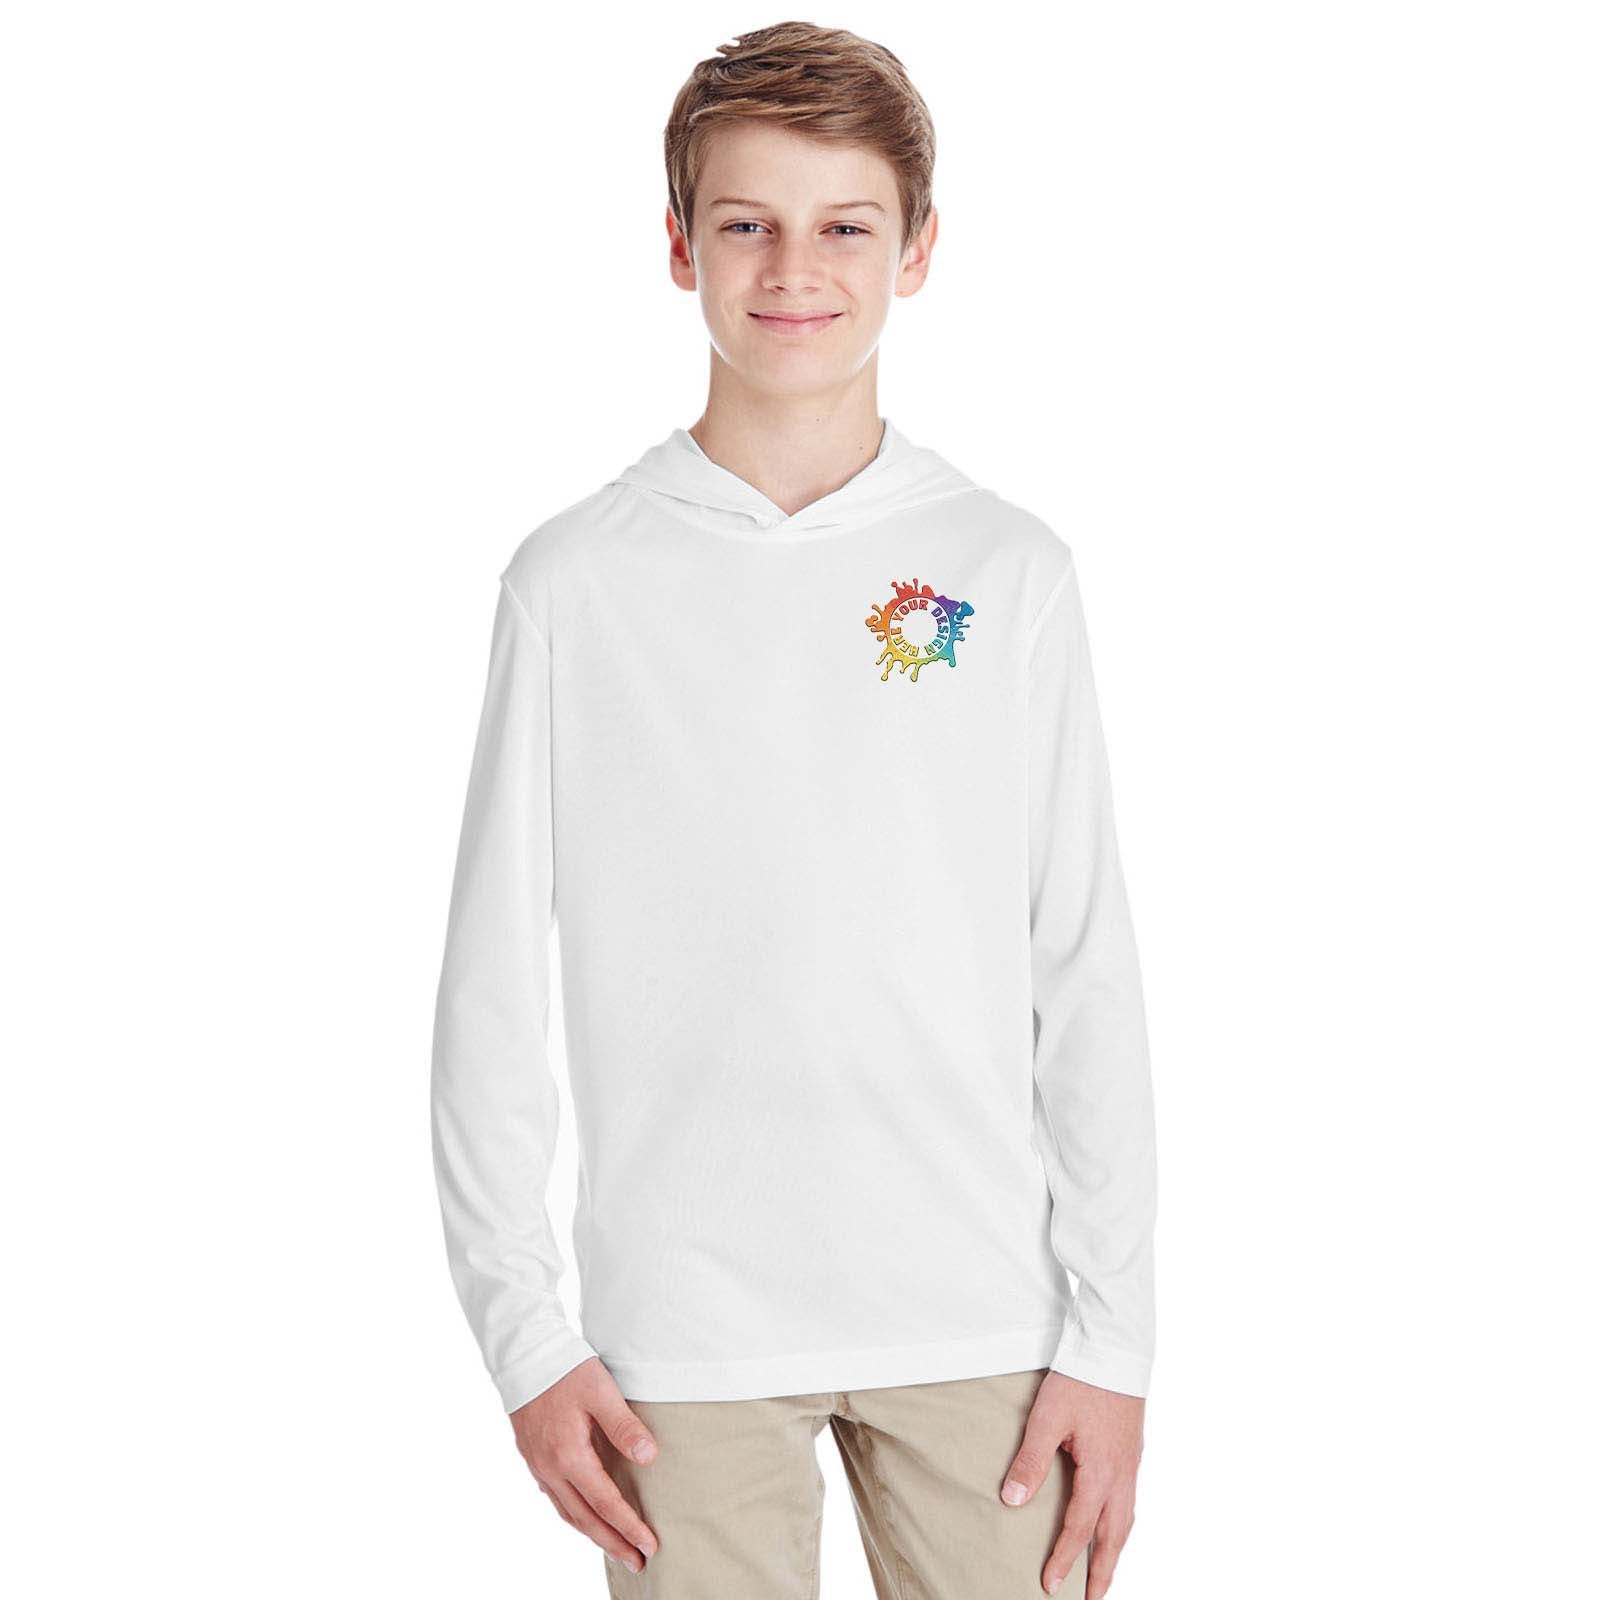 Embroidered Team 365 Youth Zone Performance Hoodie - Mato & Hash